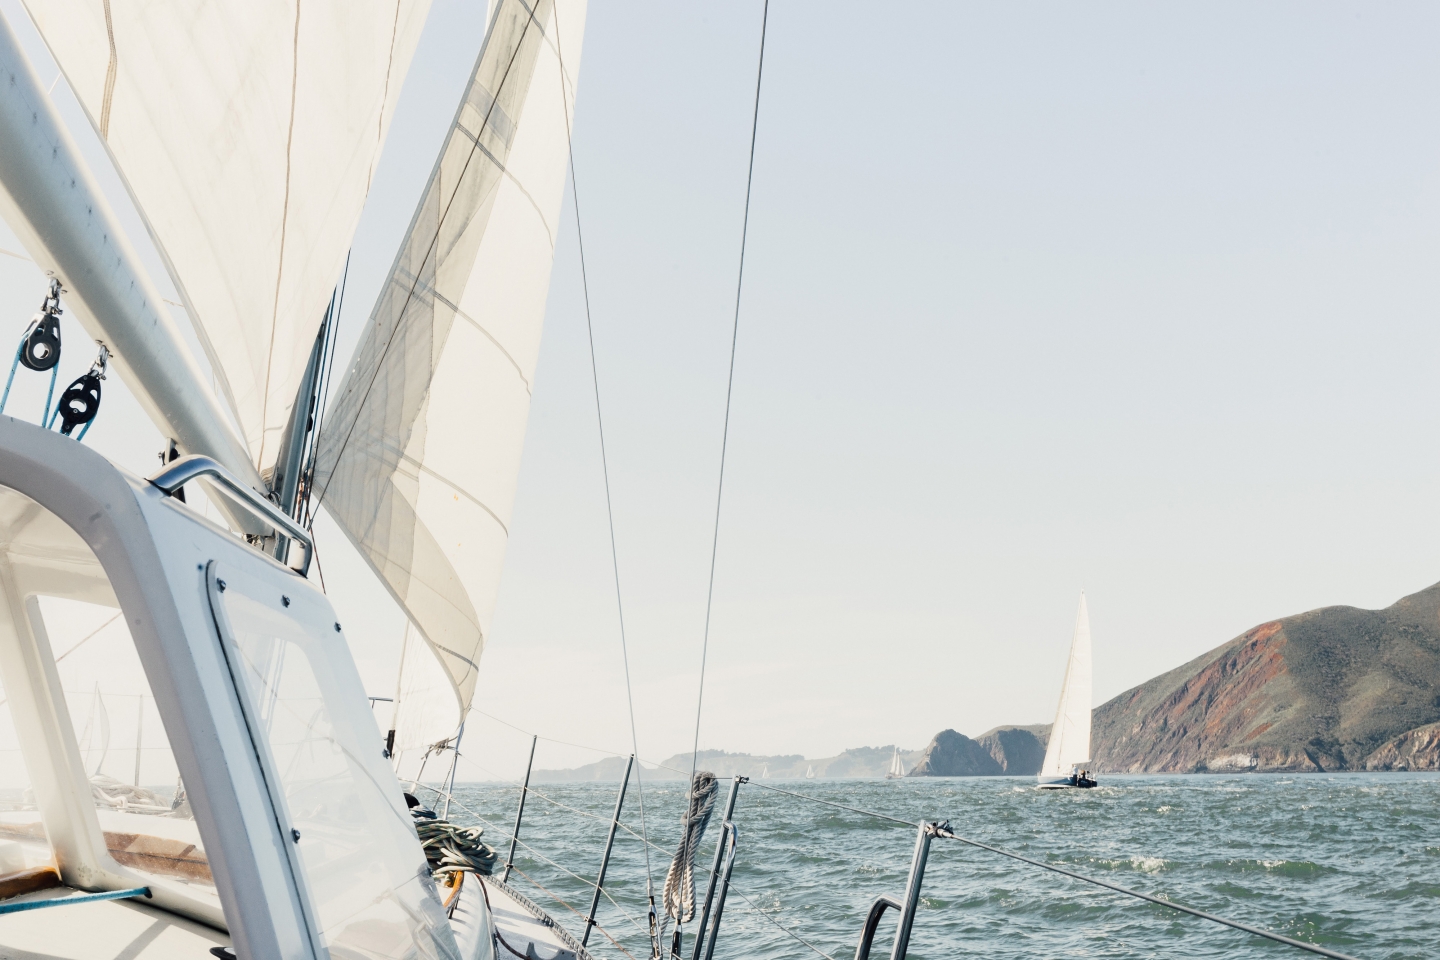 The role of a captain in the superyacht industry